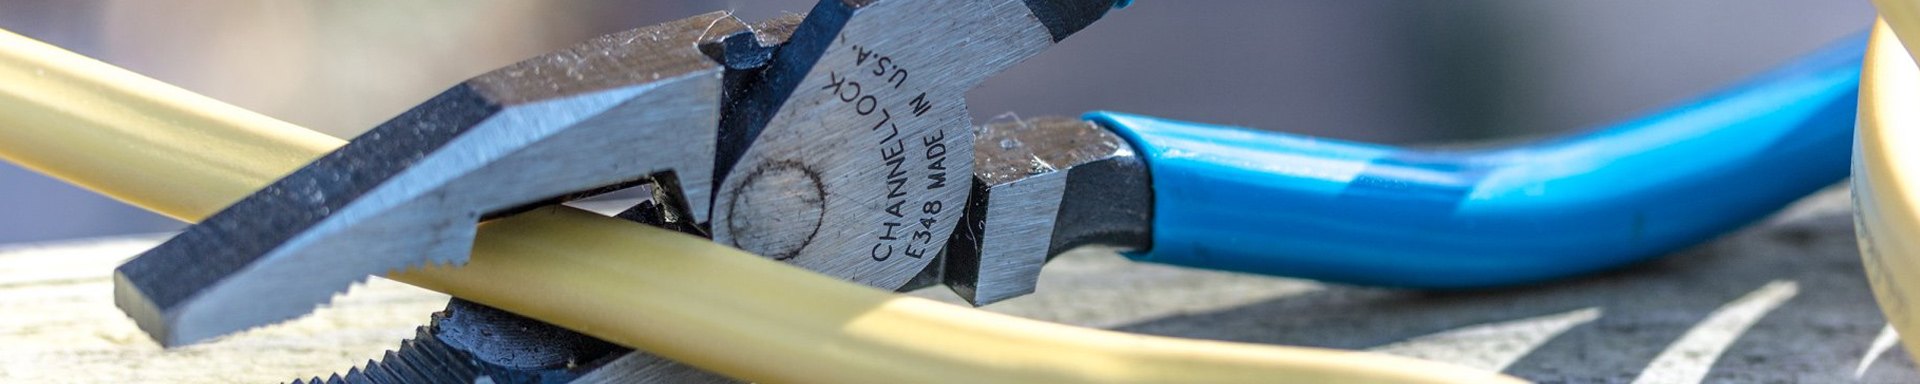 Channellock Wire & Cable Tools